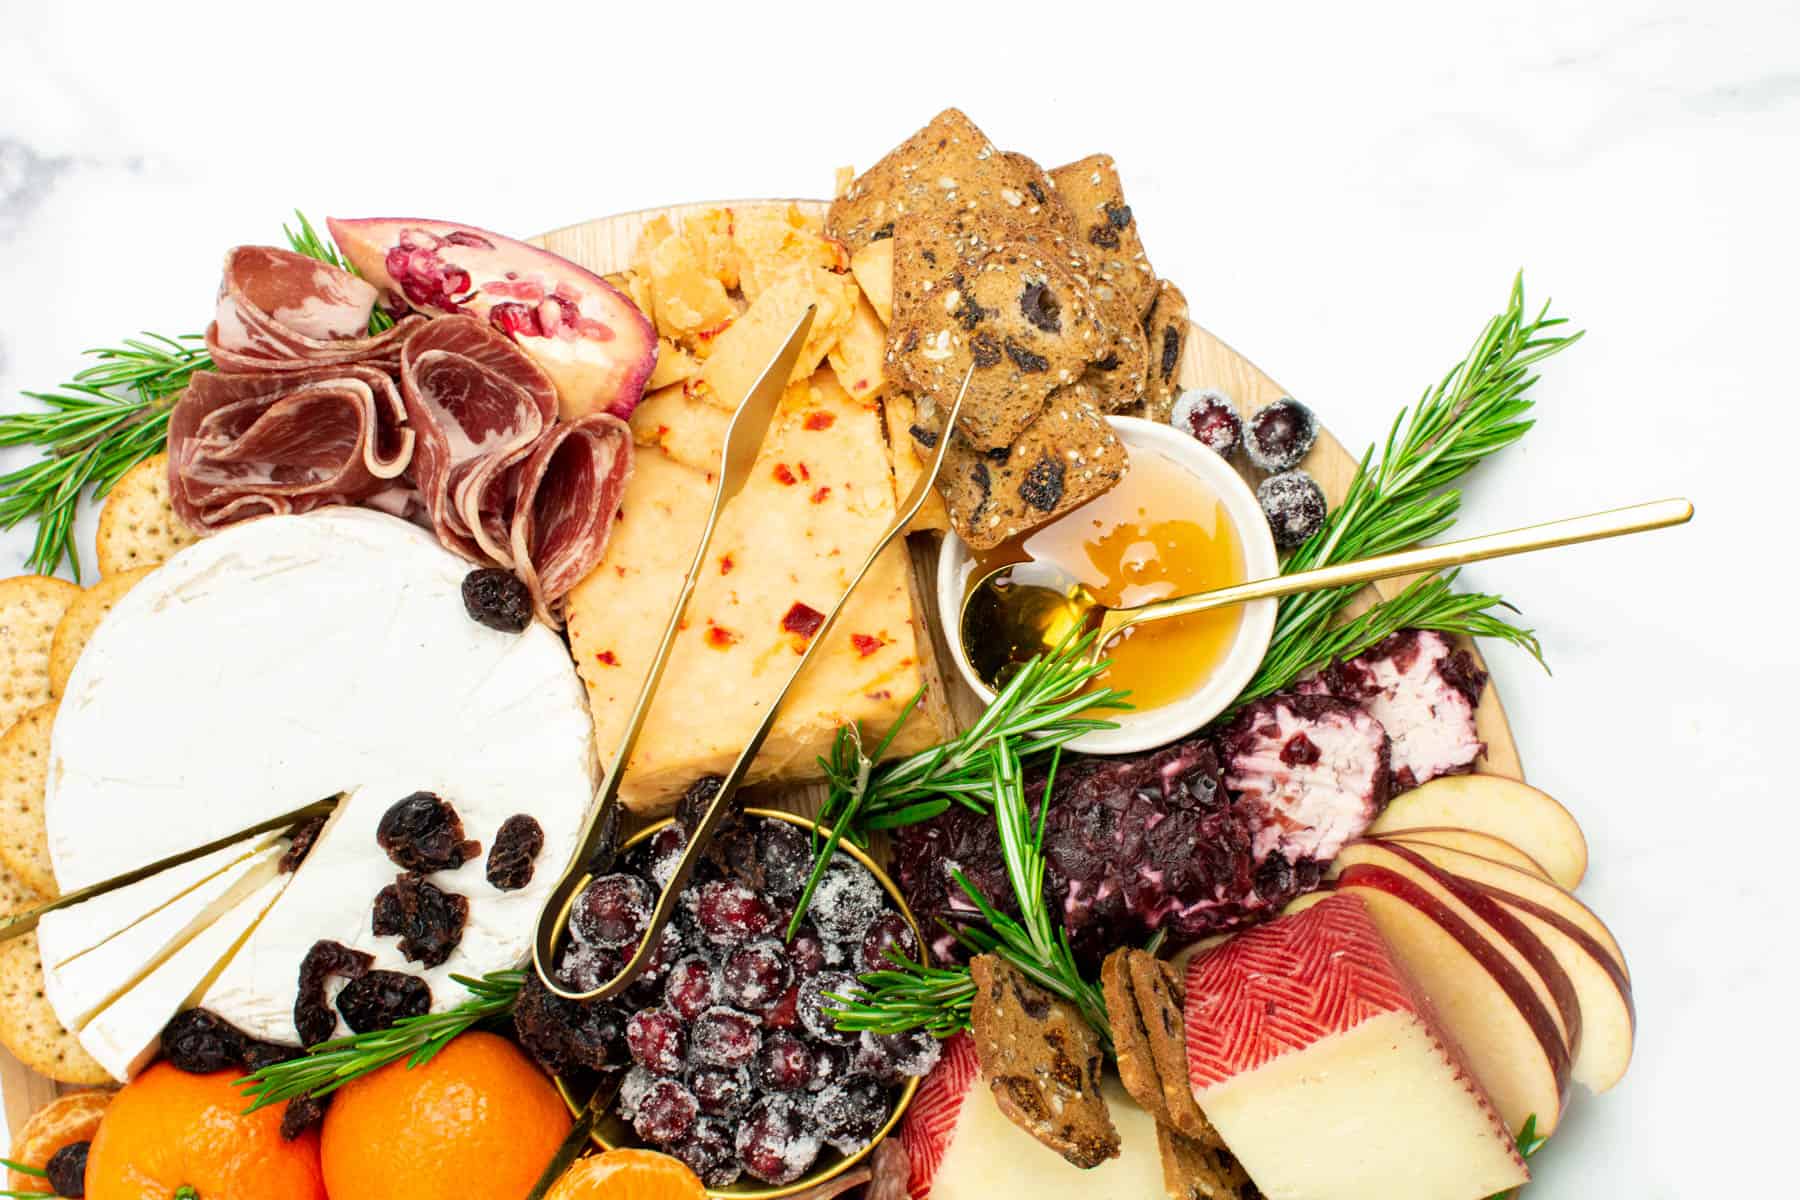 Cheeses and meats are arranged decoratively on a round wooden plate with spreads and fruits among them.